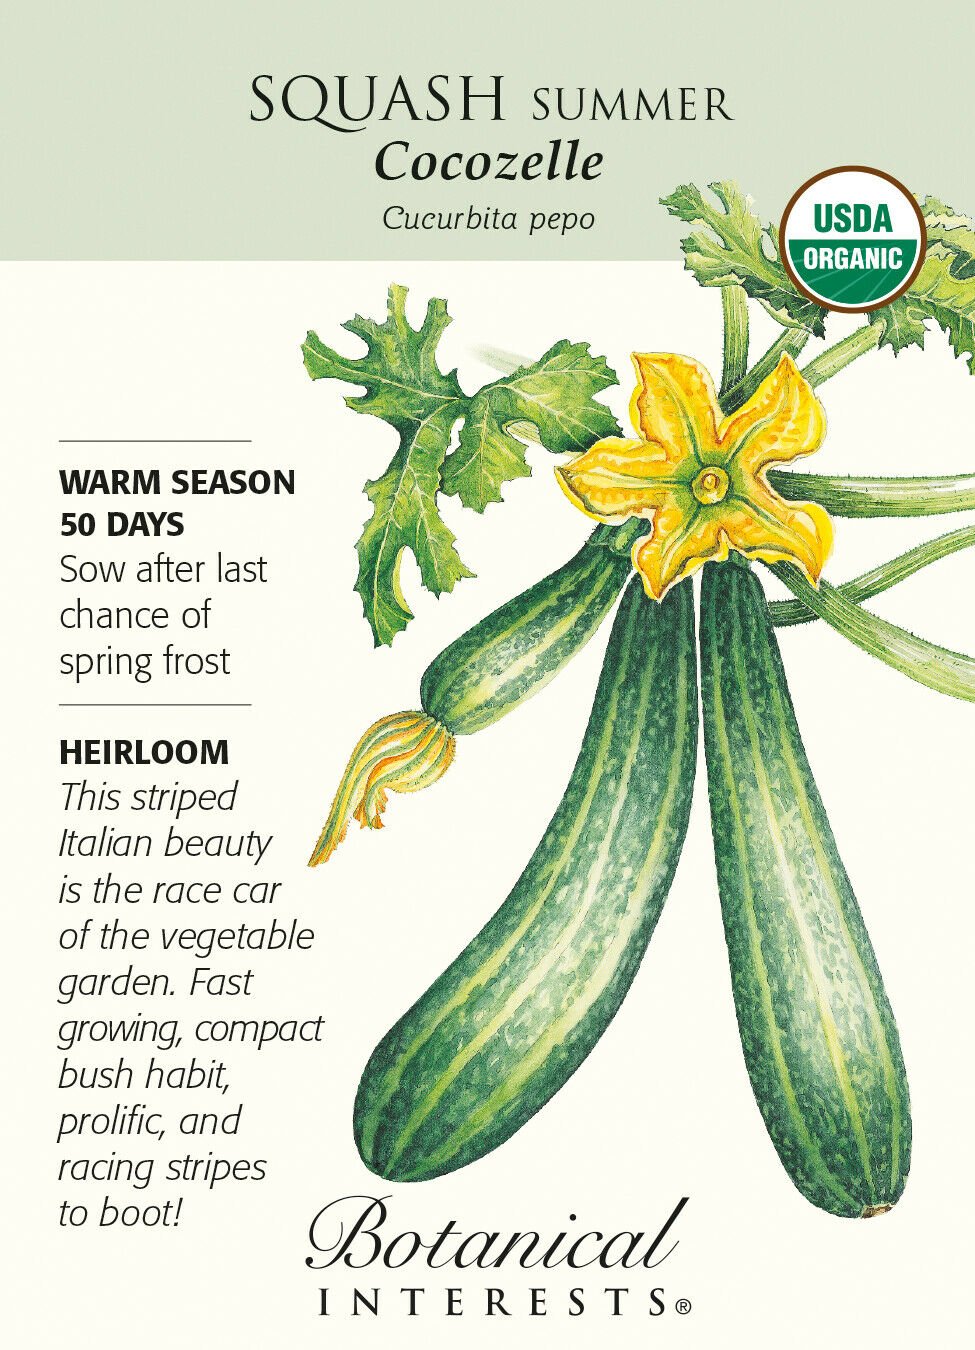 Cocozelle Summer Squash Seeds - 2 grams - Organic